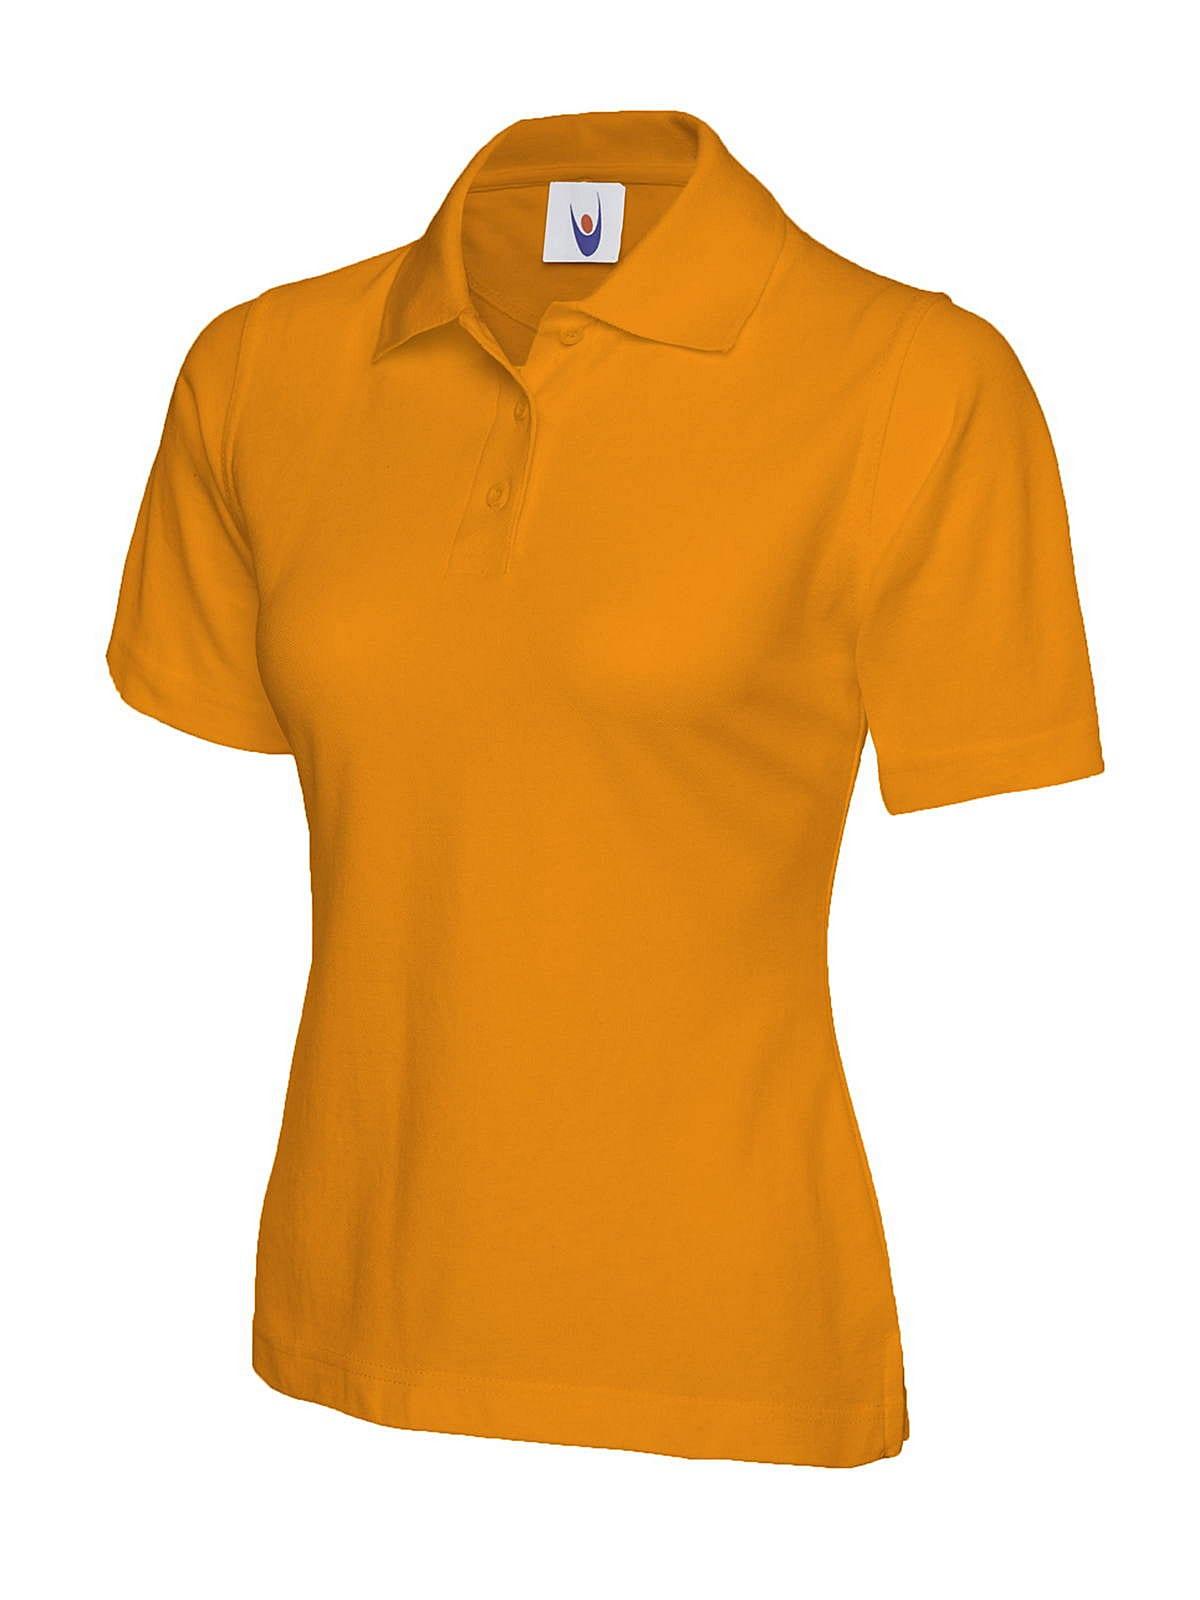 Uneek 220GSM Womens Polo Shirt in Orange (Product Code: UC106)